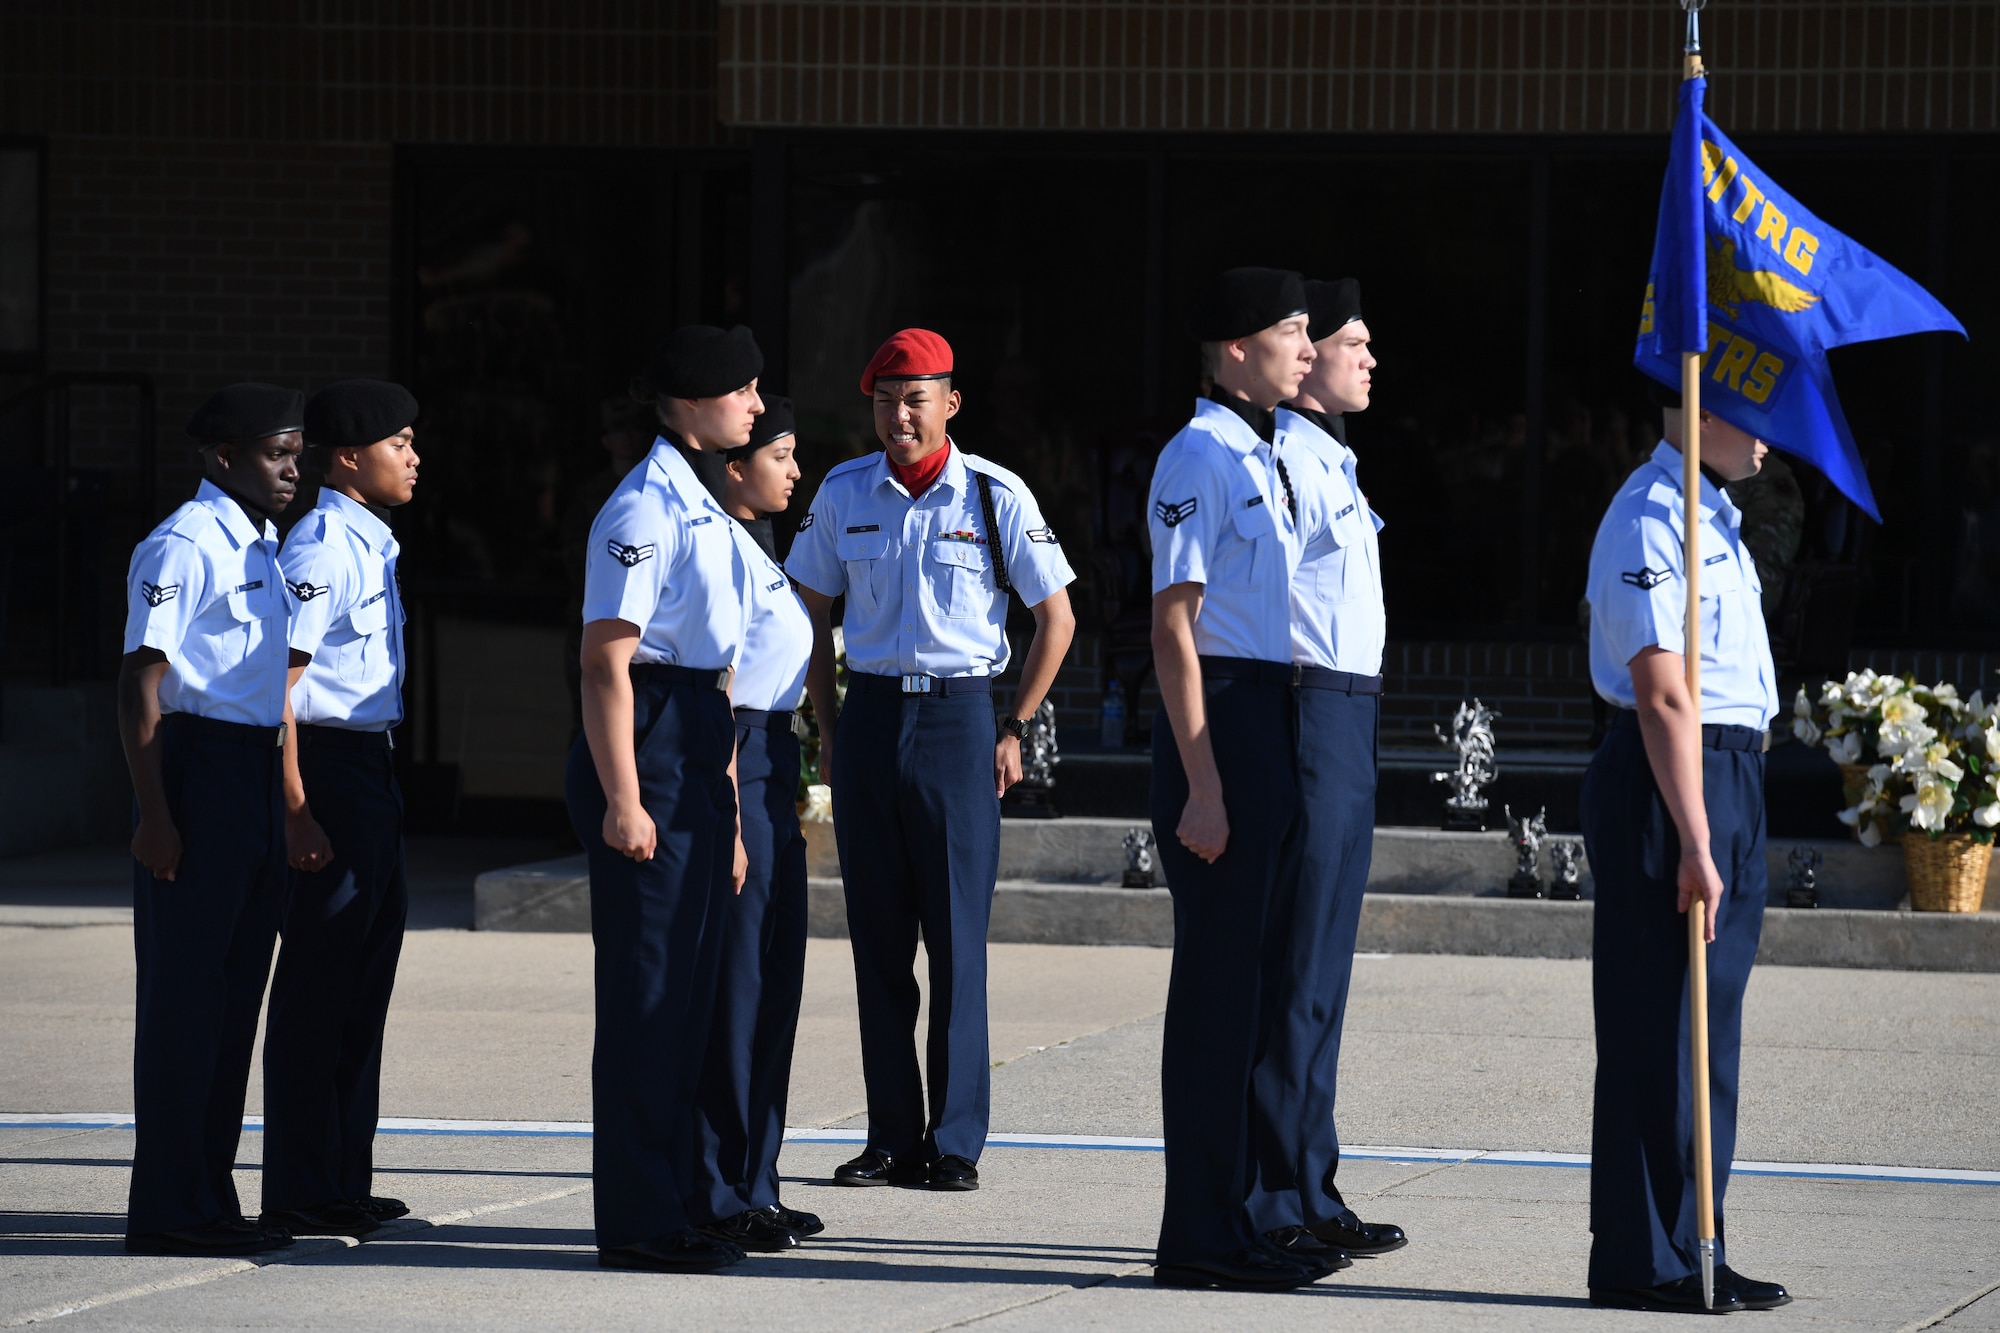 Members of the 335th Training Squadron regulation drill team perform during the 81st Training Group drill down on the Levitow Training Support Facility drill pad at Keesler Air Force Base, Mississippi, April 14, 2023.